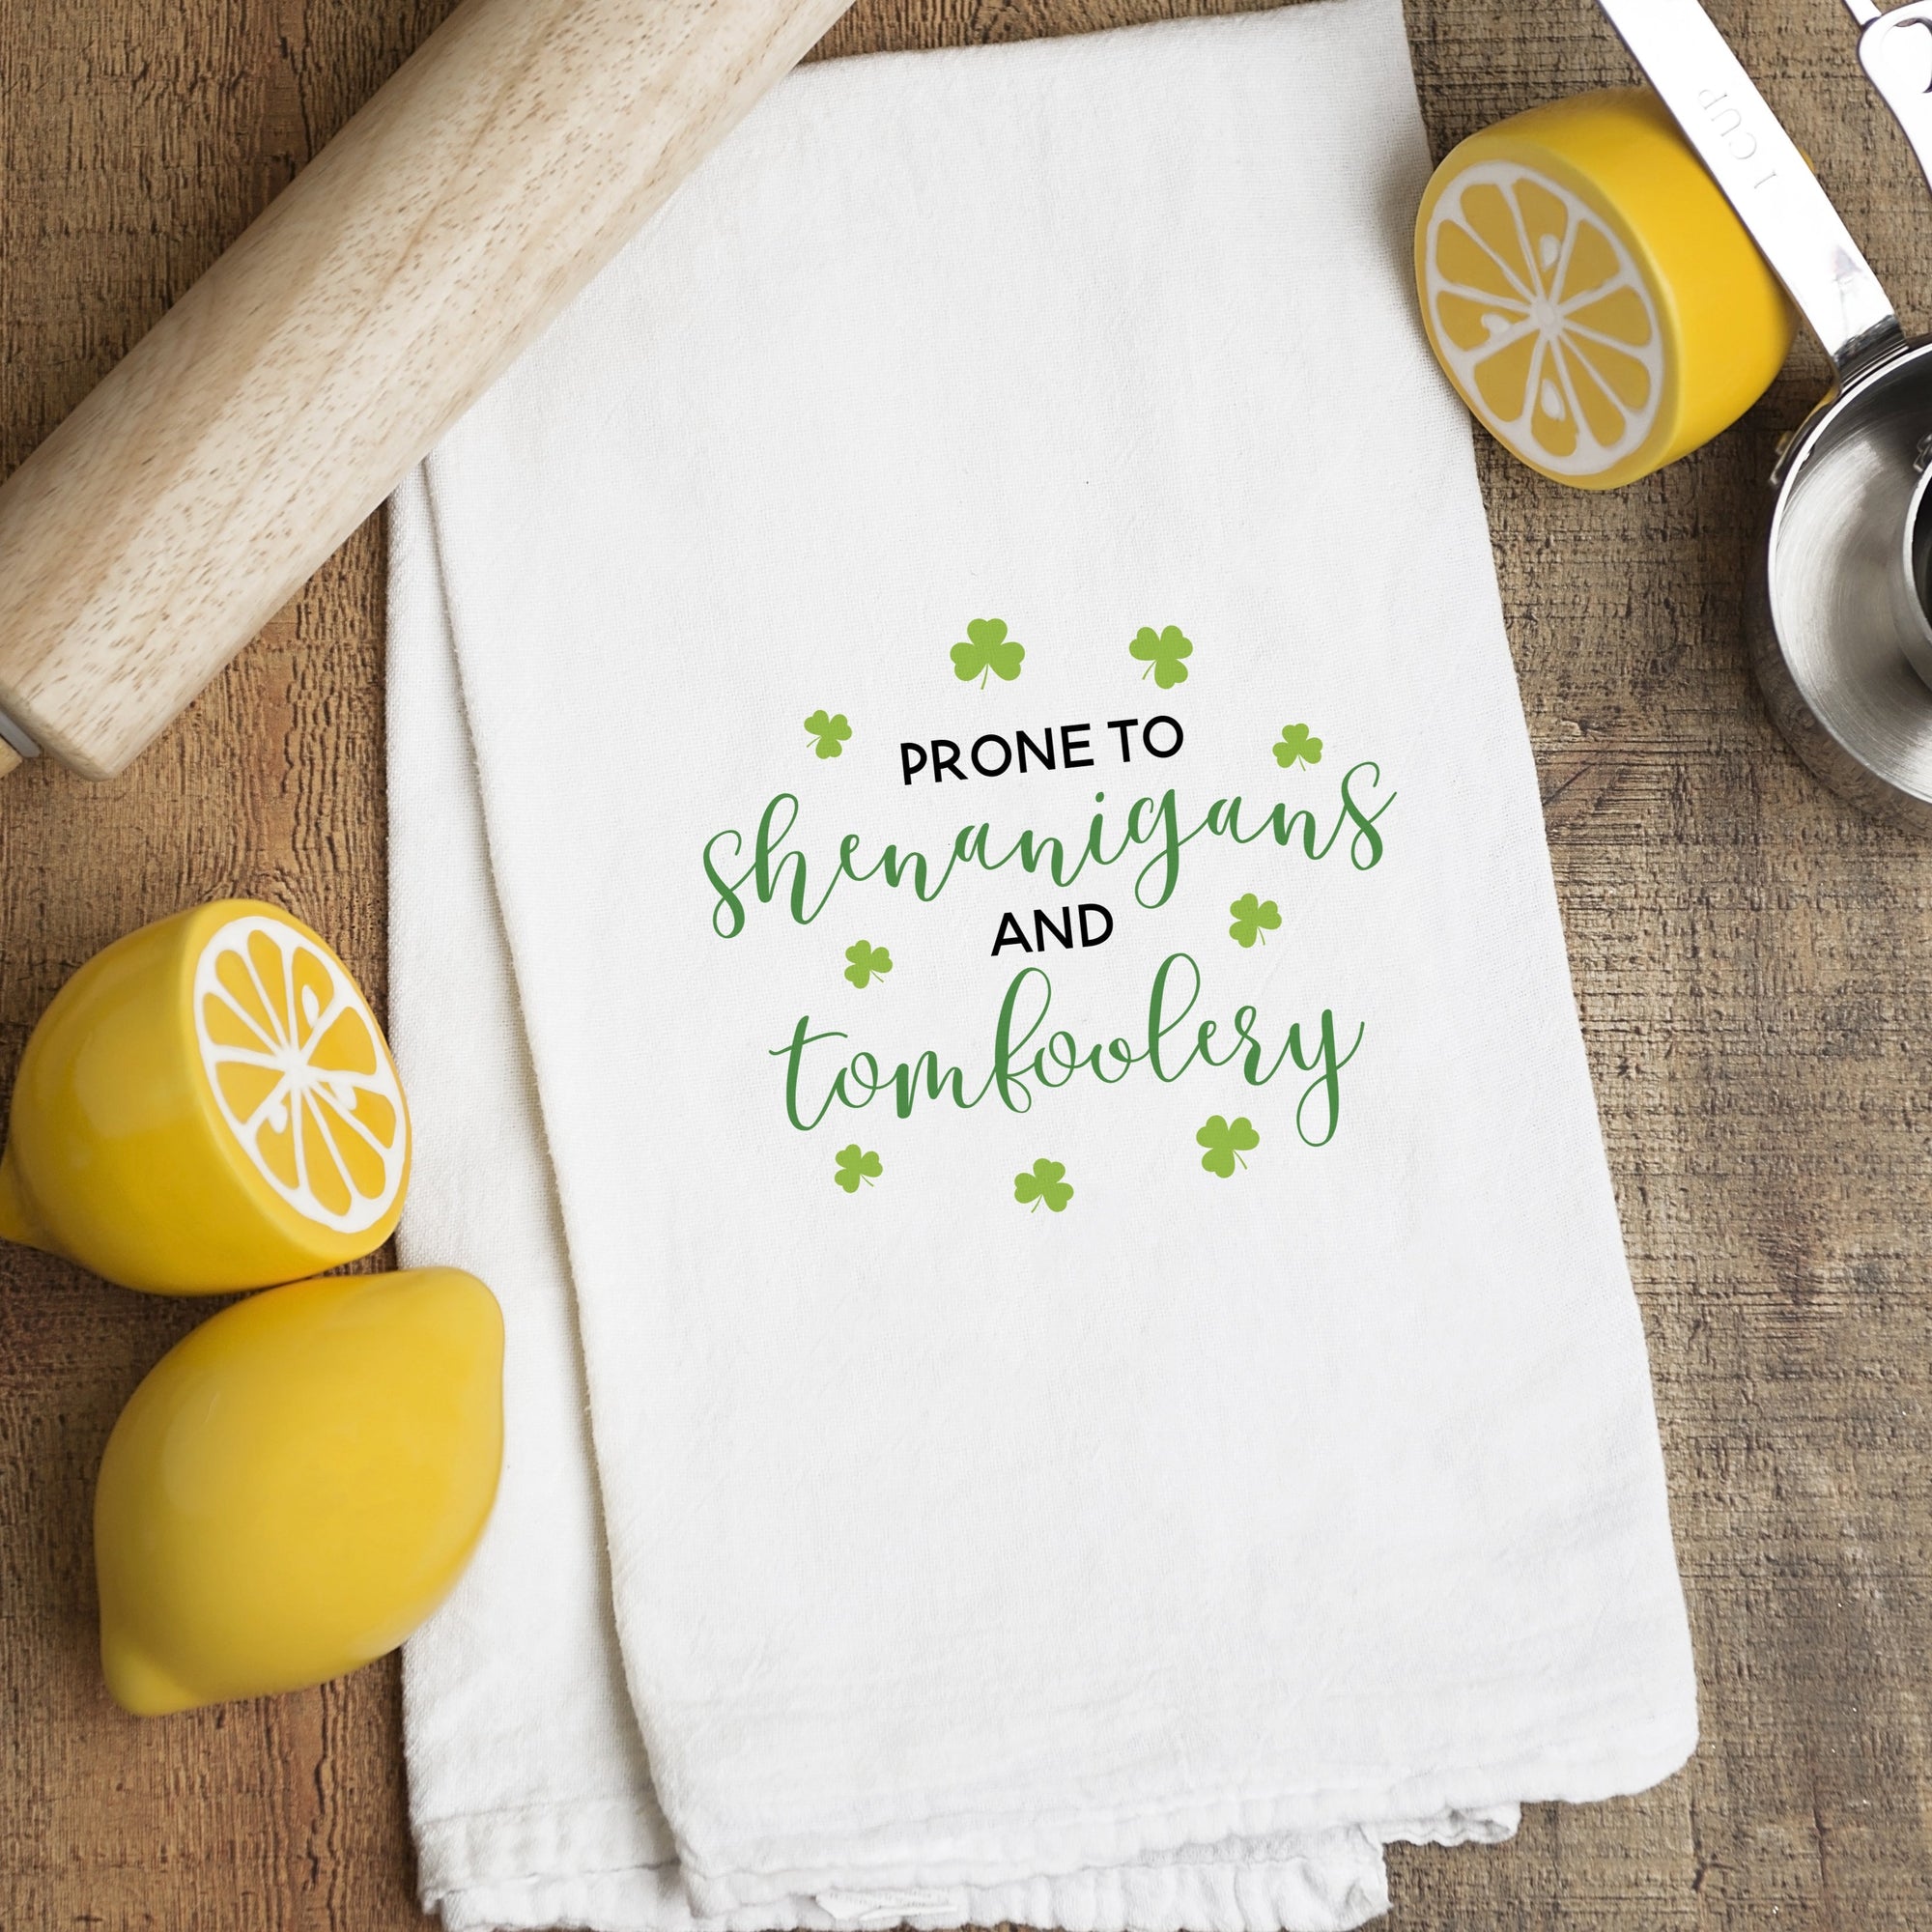 Prone to Shenanigans and Tomfoolery, St. Patrick's Day Tea Towel, PIPSY.COM